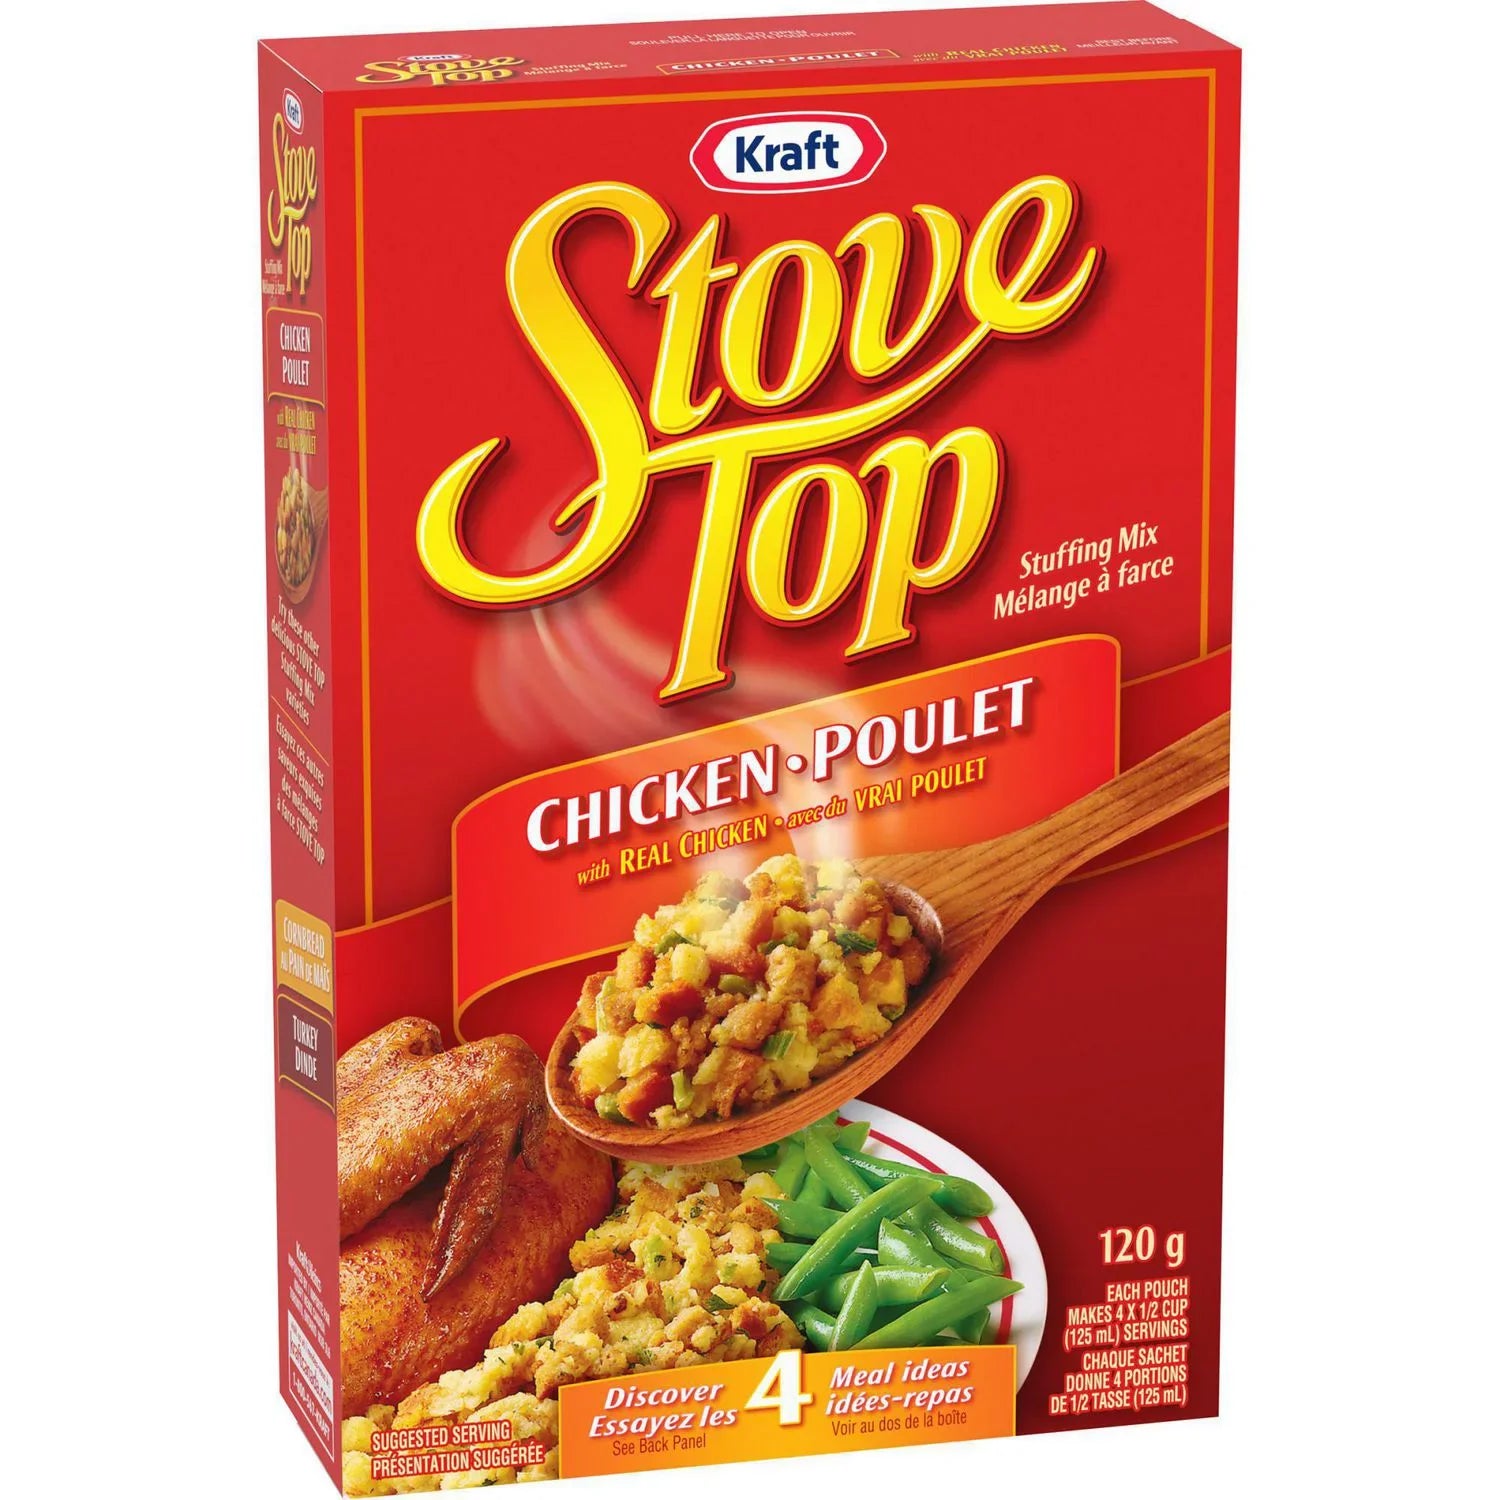 Stove Top Stuffing Mix Chicken (120g)